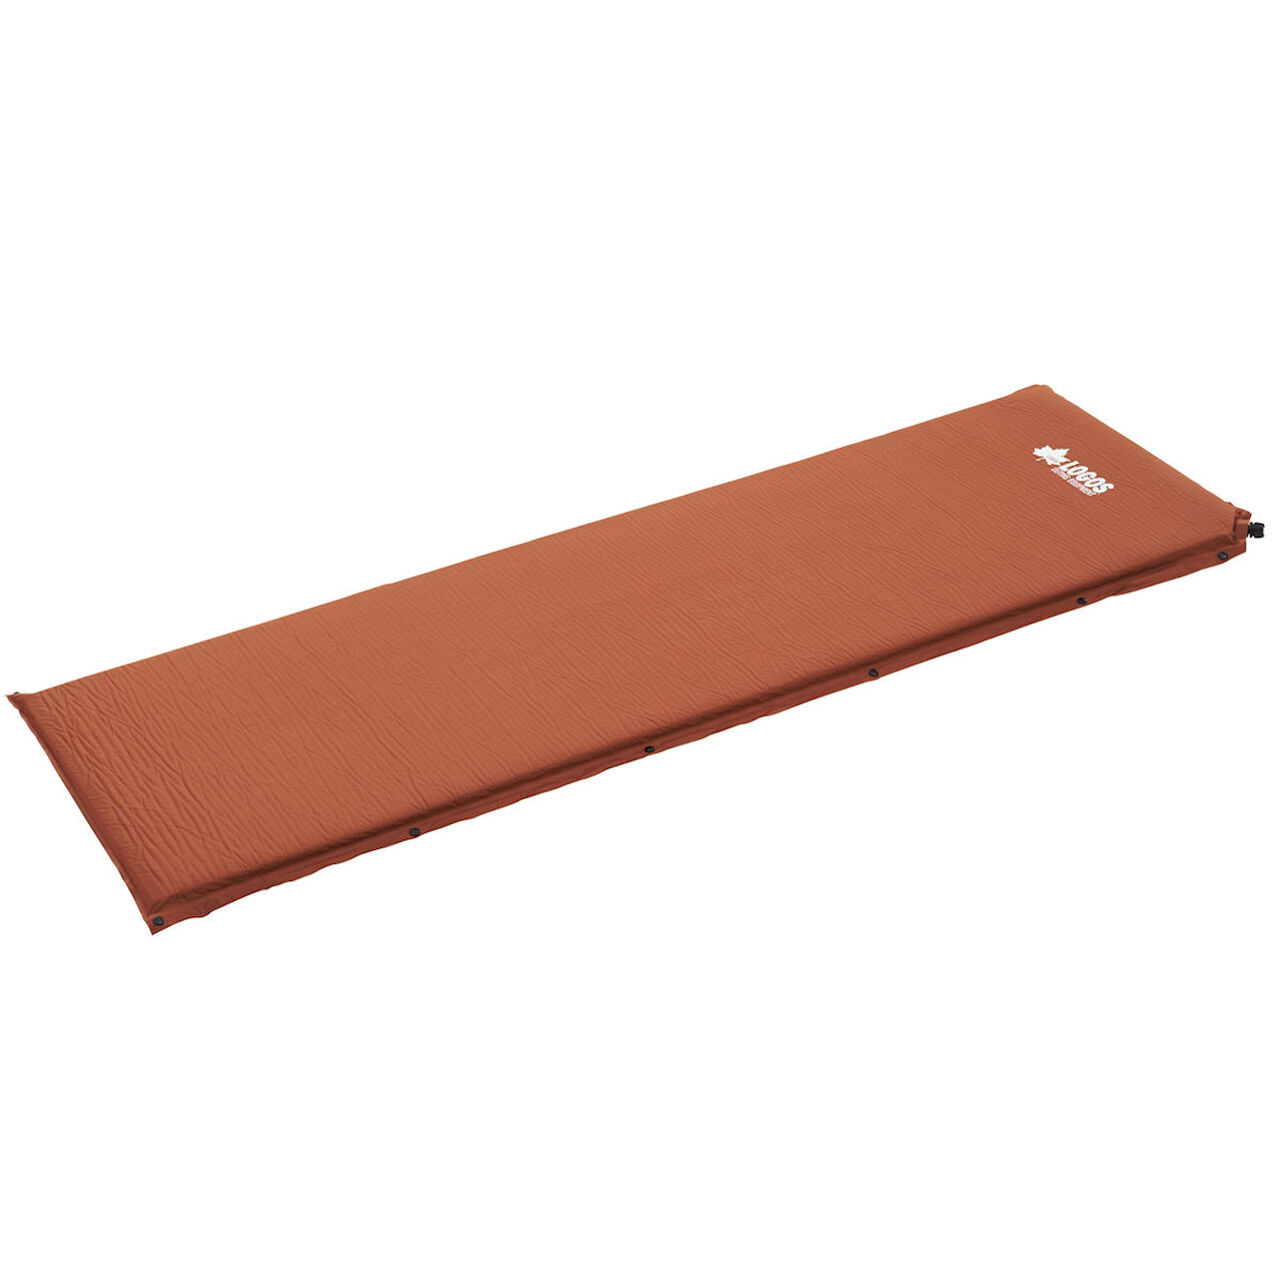 (High Density Foam) 55 Compact Self-inflating Mat - SOLO,, large image number 3